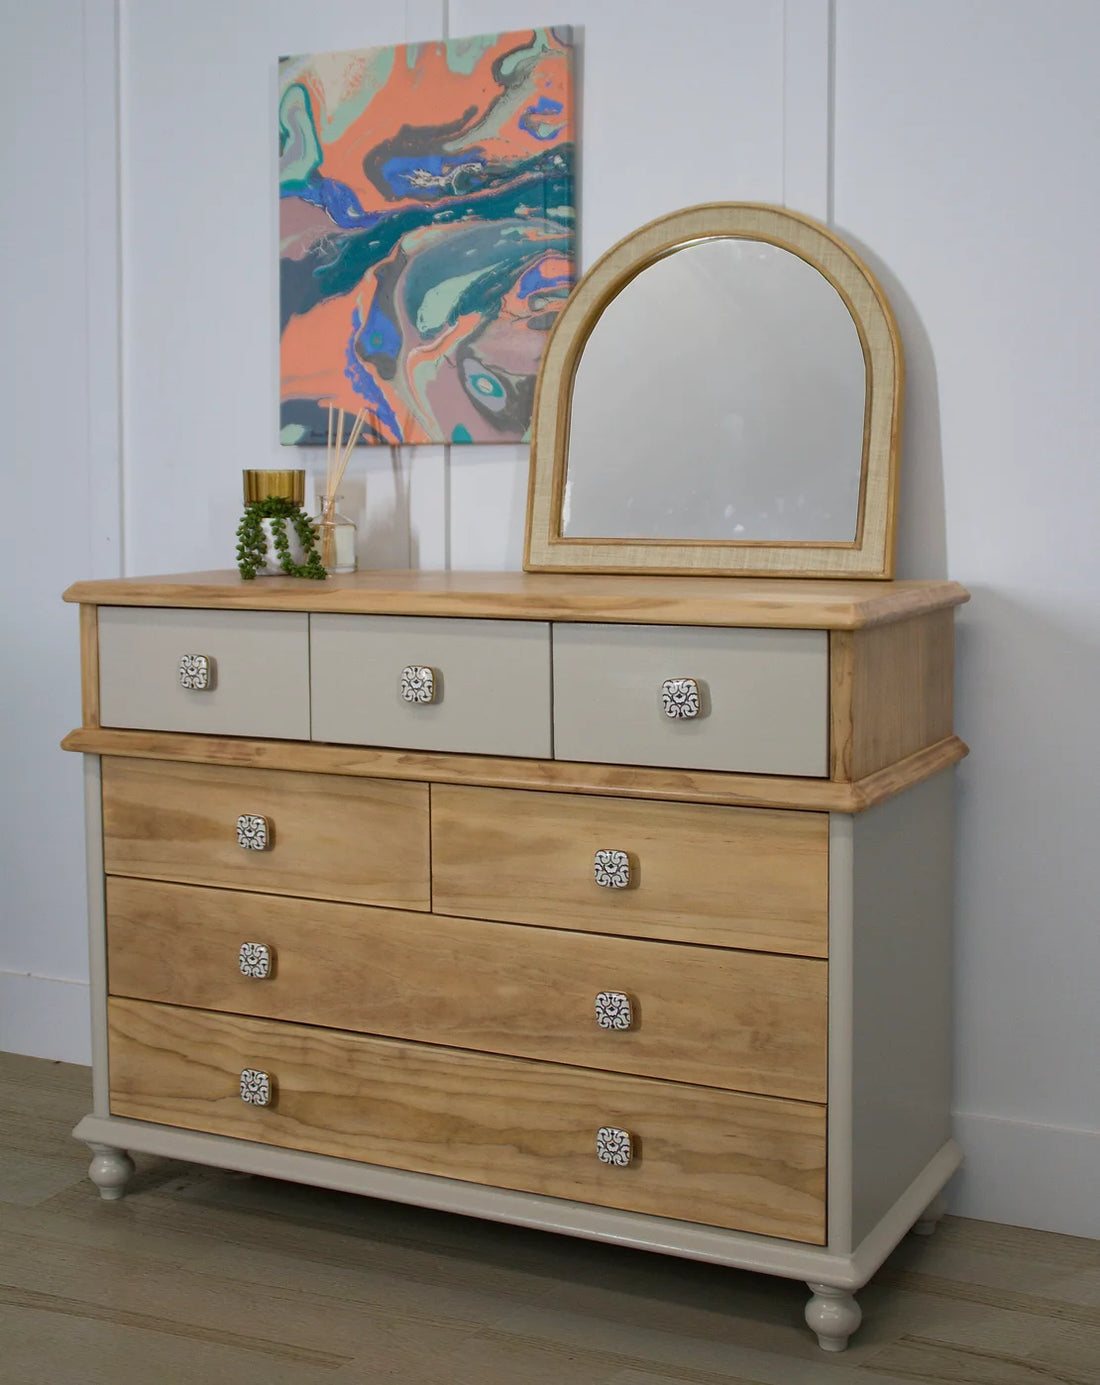 6 reasons hand painted furniture is better